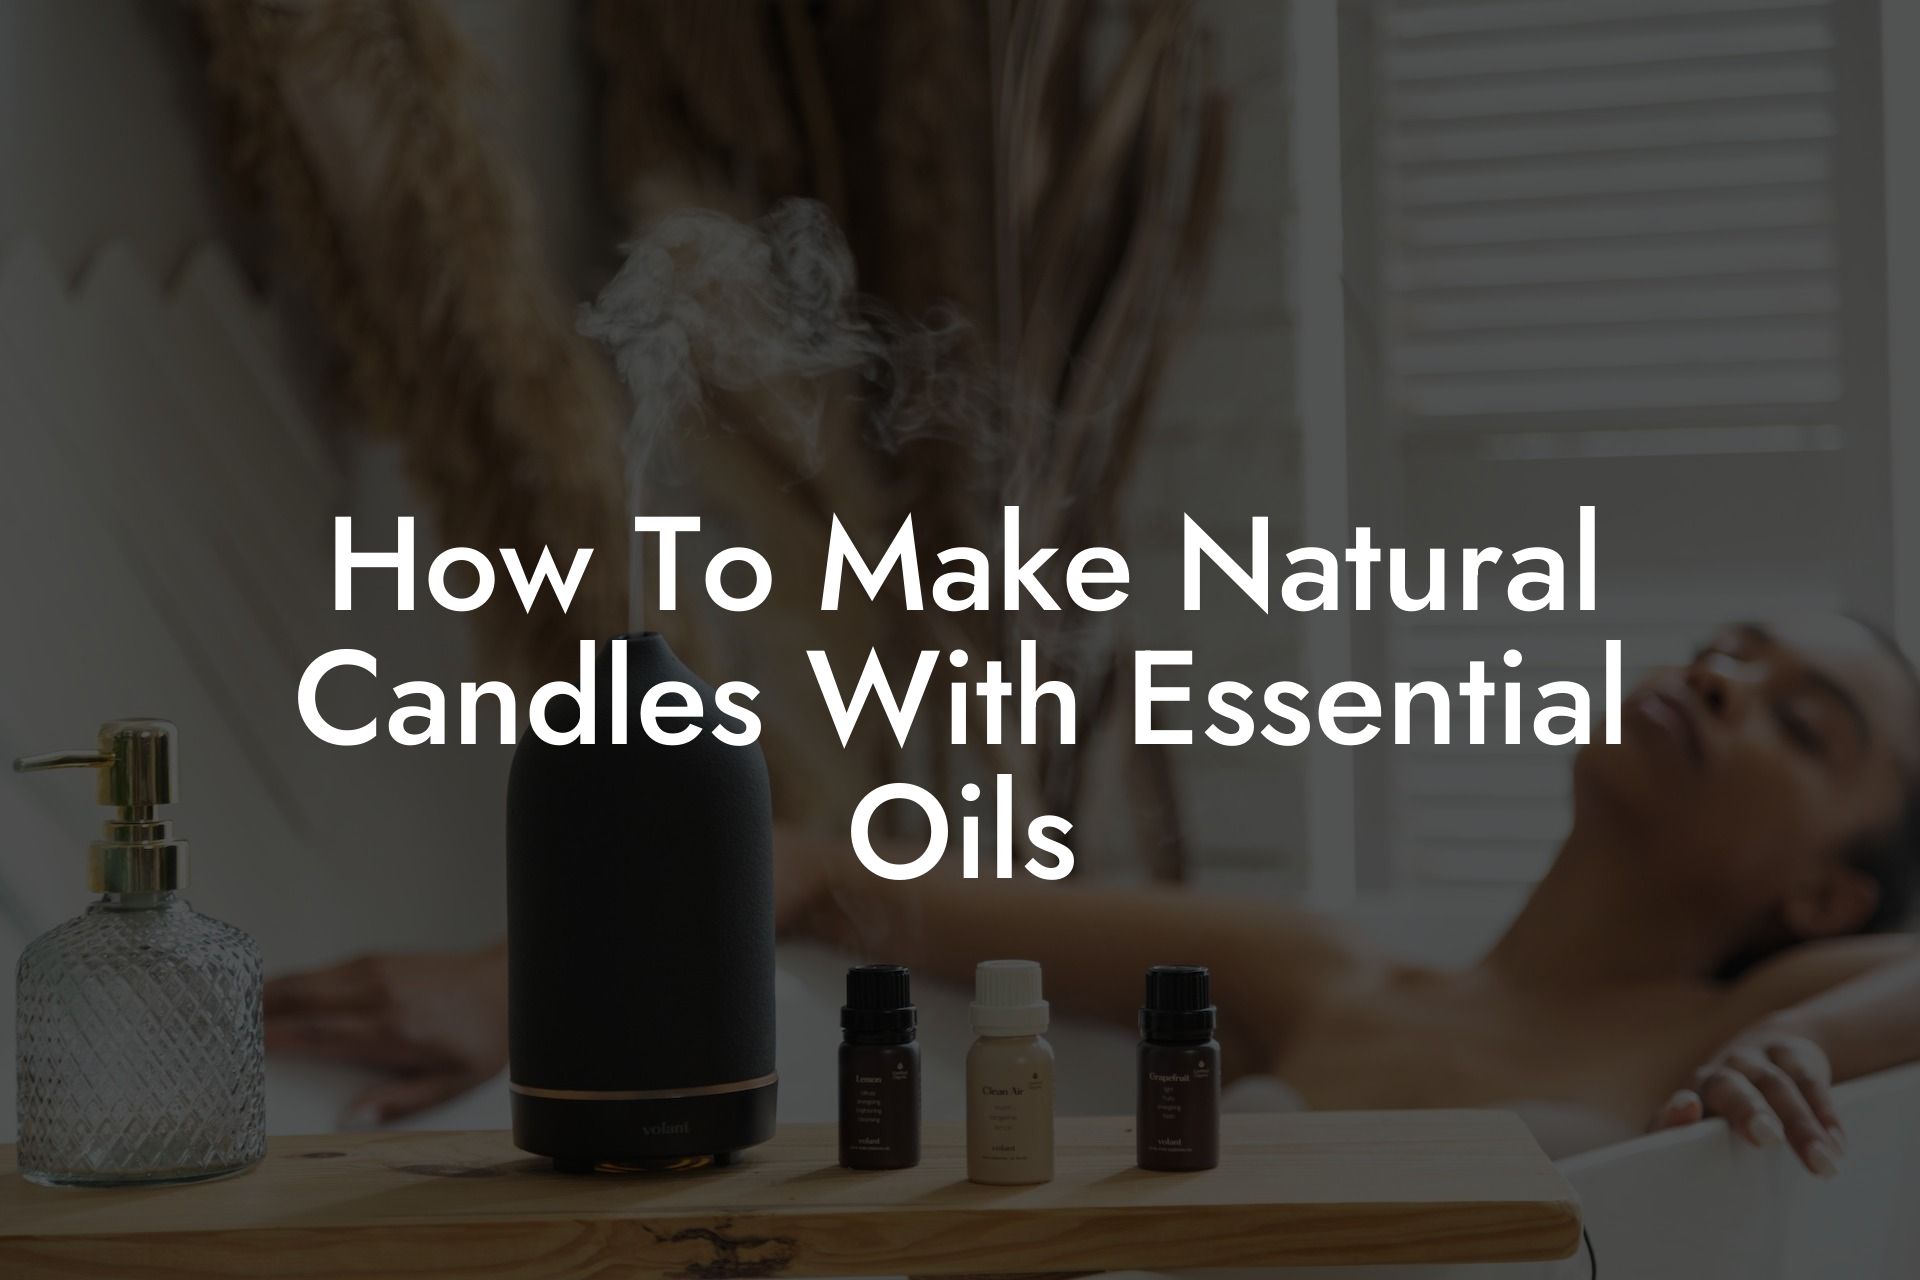 How To Make Natural Candles With Essential Oils